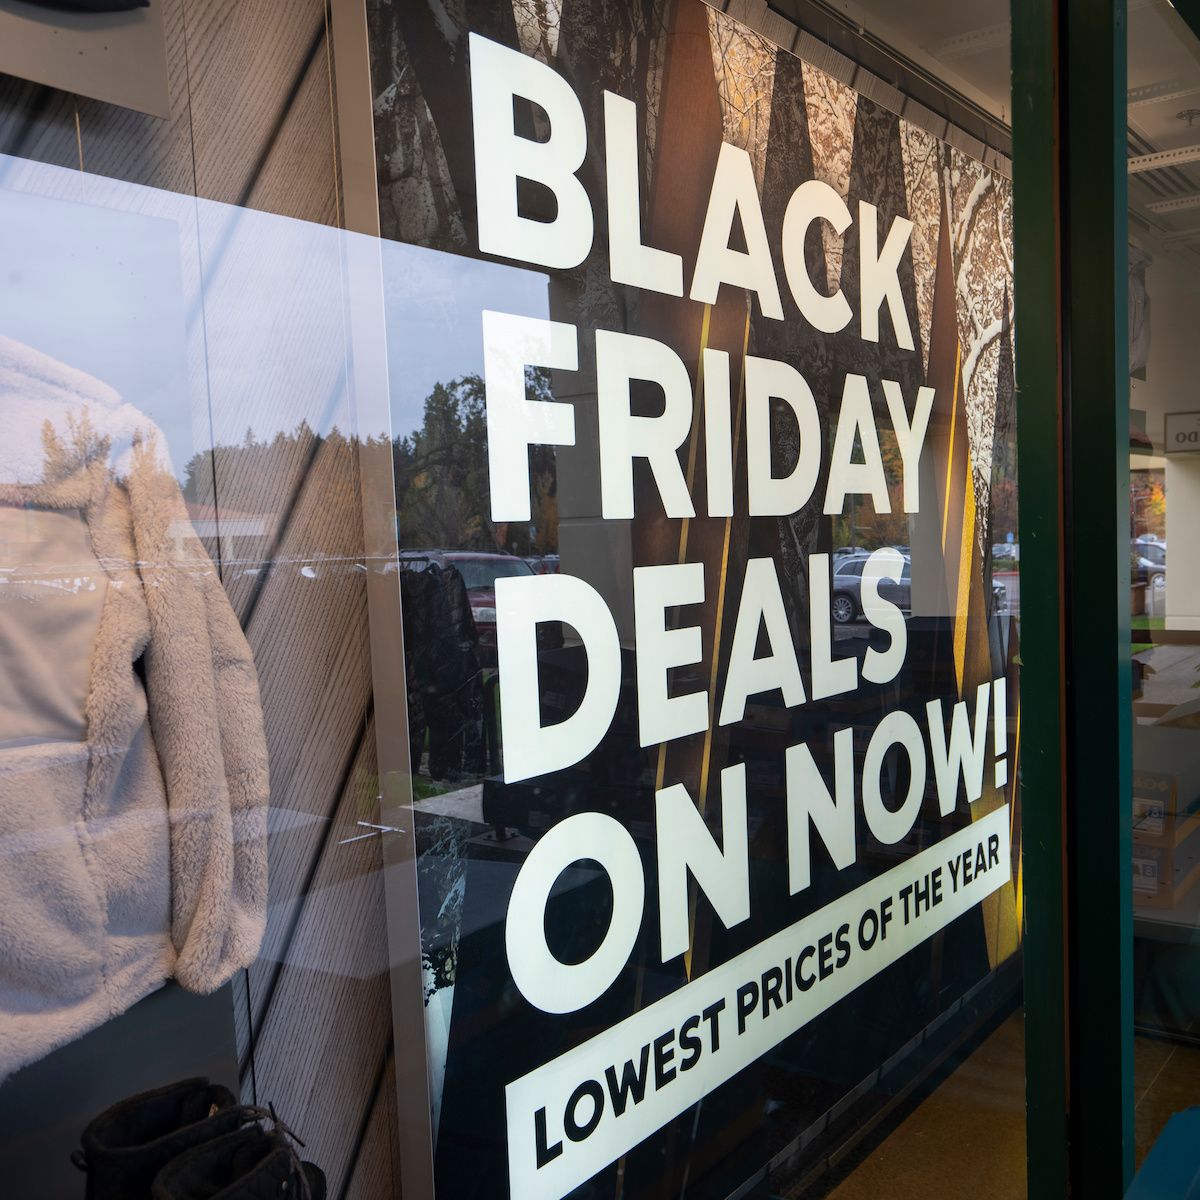 Black Friday Deals advertisement is shown on the storefront of a Columbia Sportswear Factory. Online shopping for Black Friday deals can have more potential risks. 